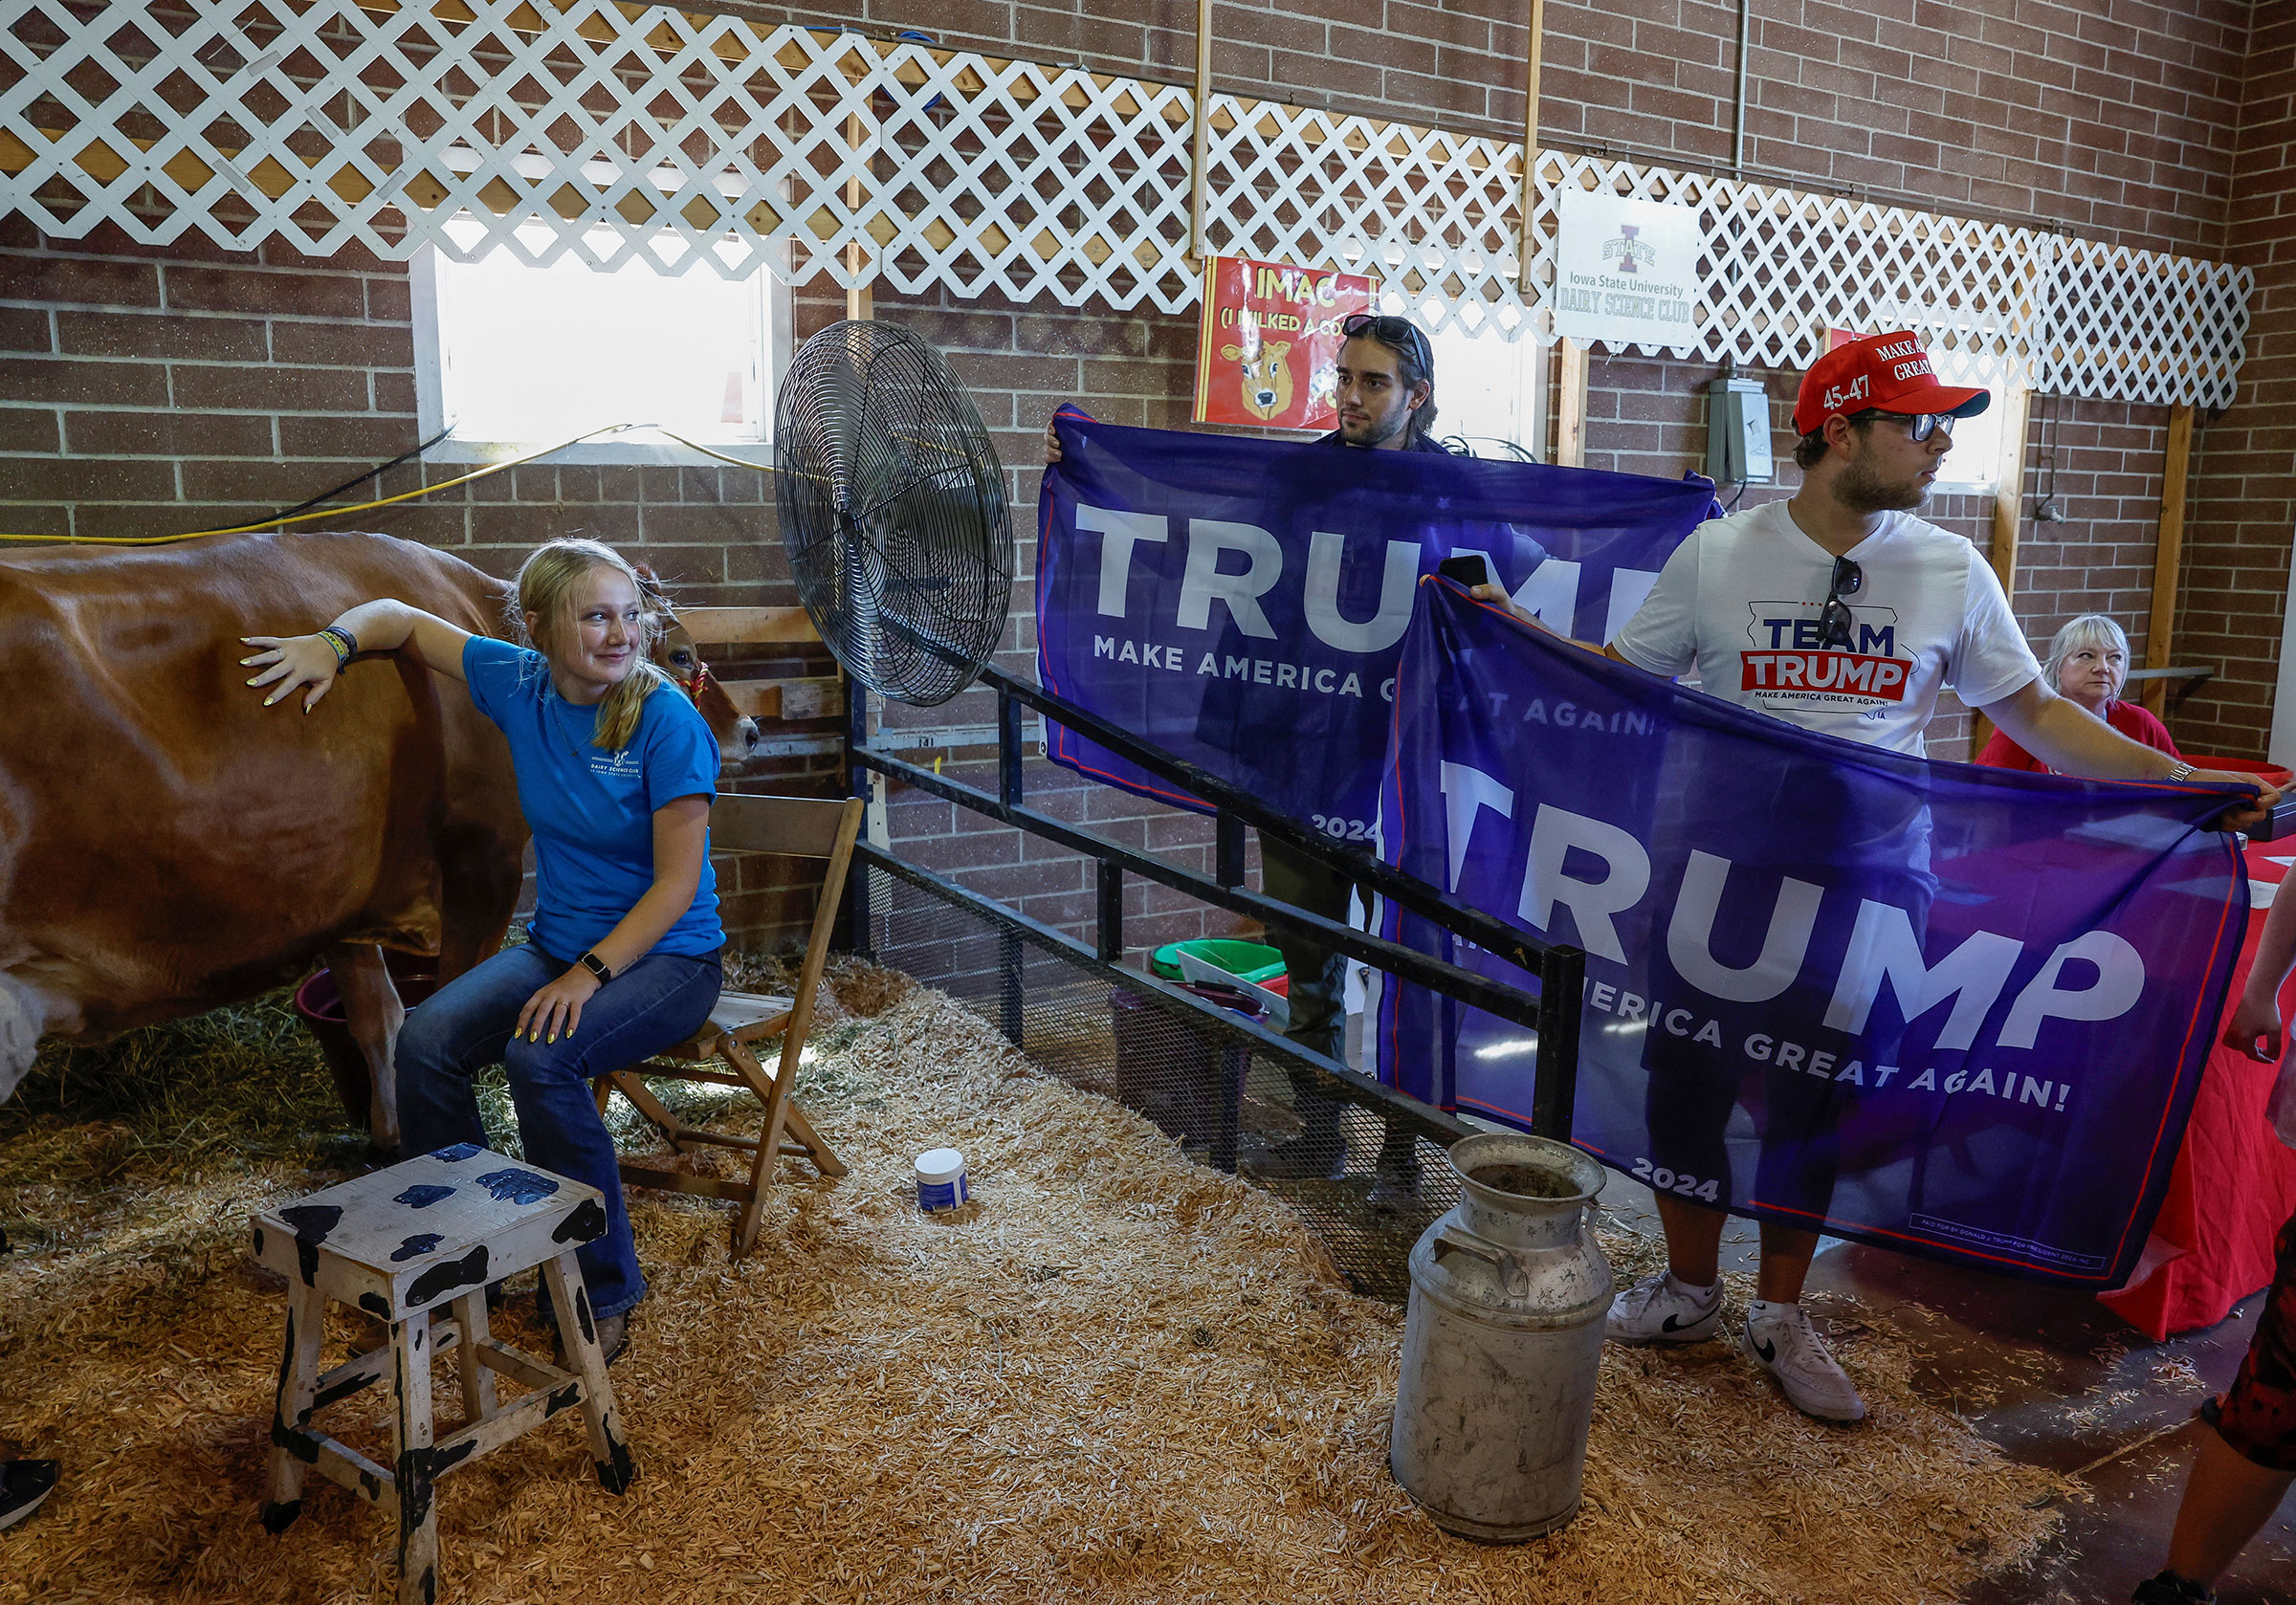 Trump campaign workers hold Trump flags for a photo opportunity with Kari Lake, former Republican candidate for Governor of Arizona, at the cattle barn on Aug. 11. (Evelyn Hockstein—Reuters)